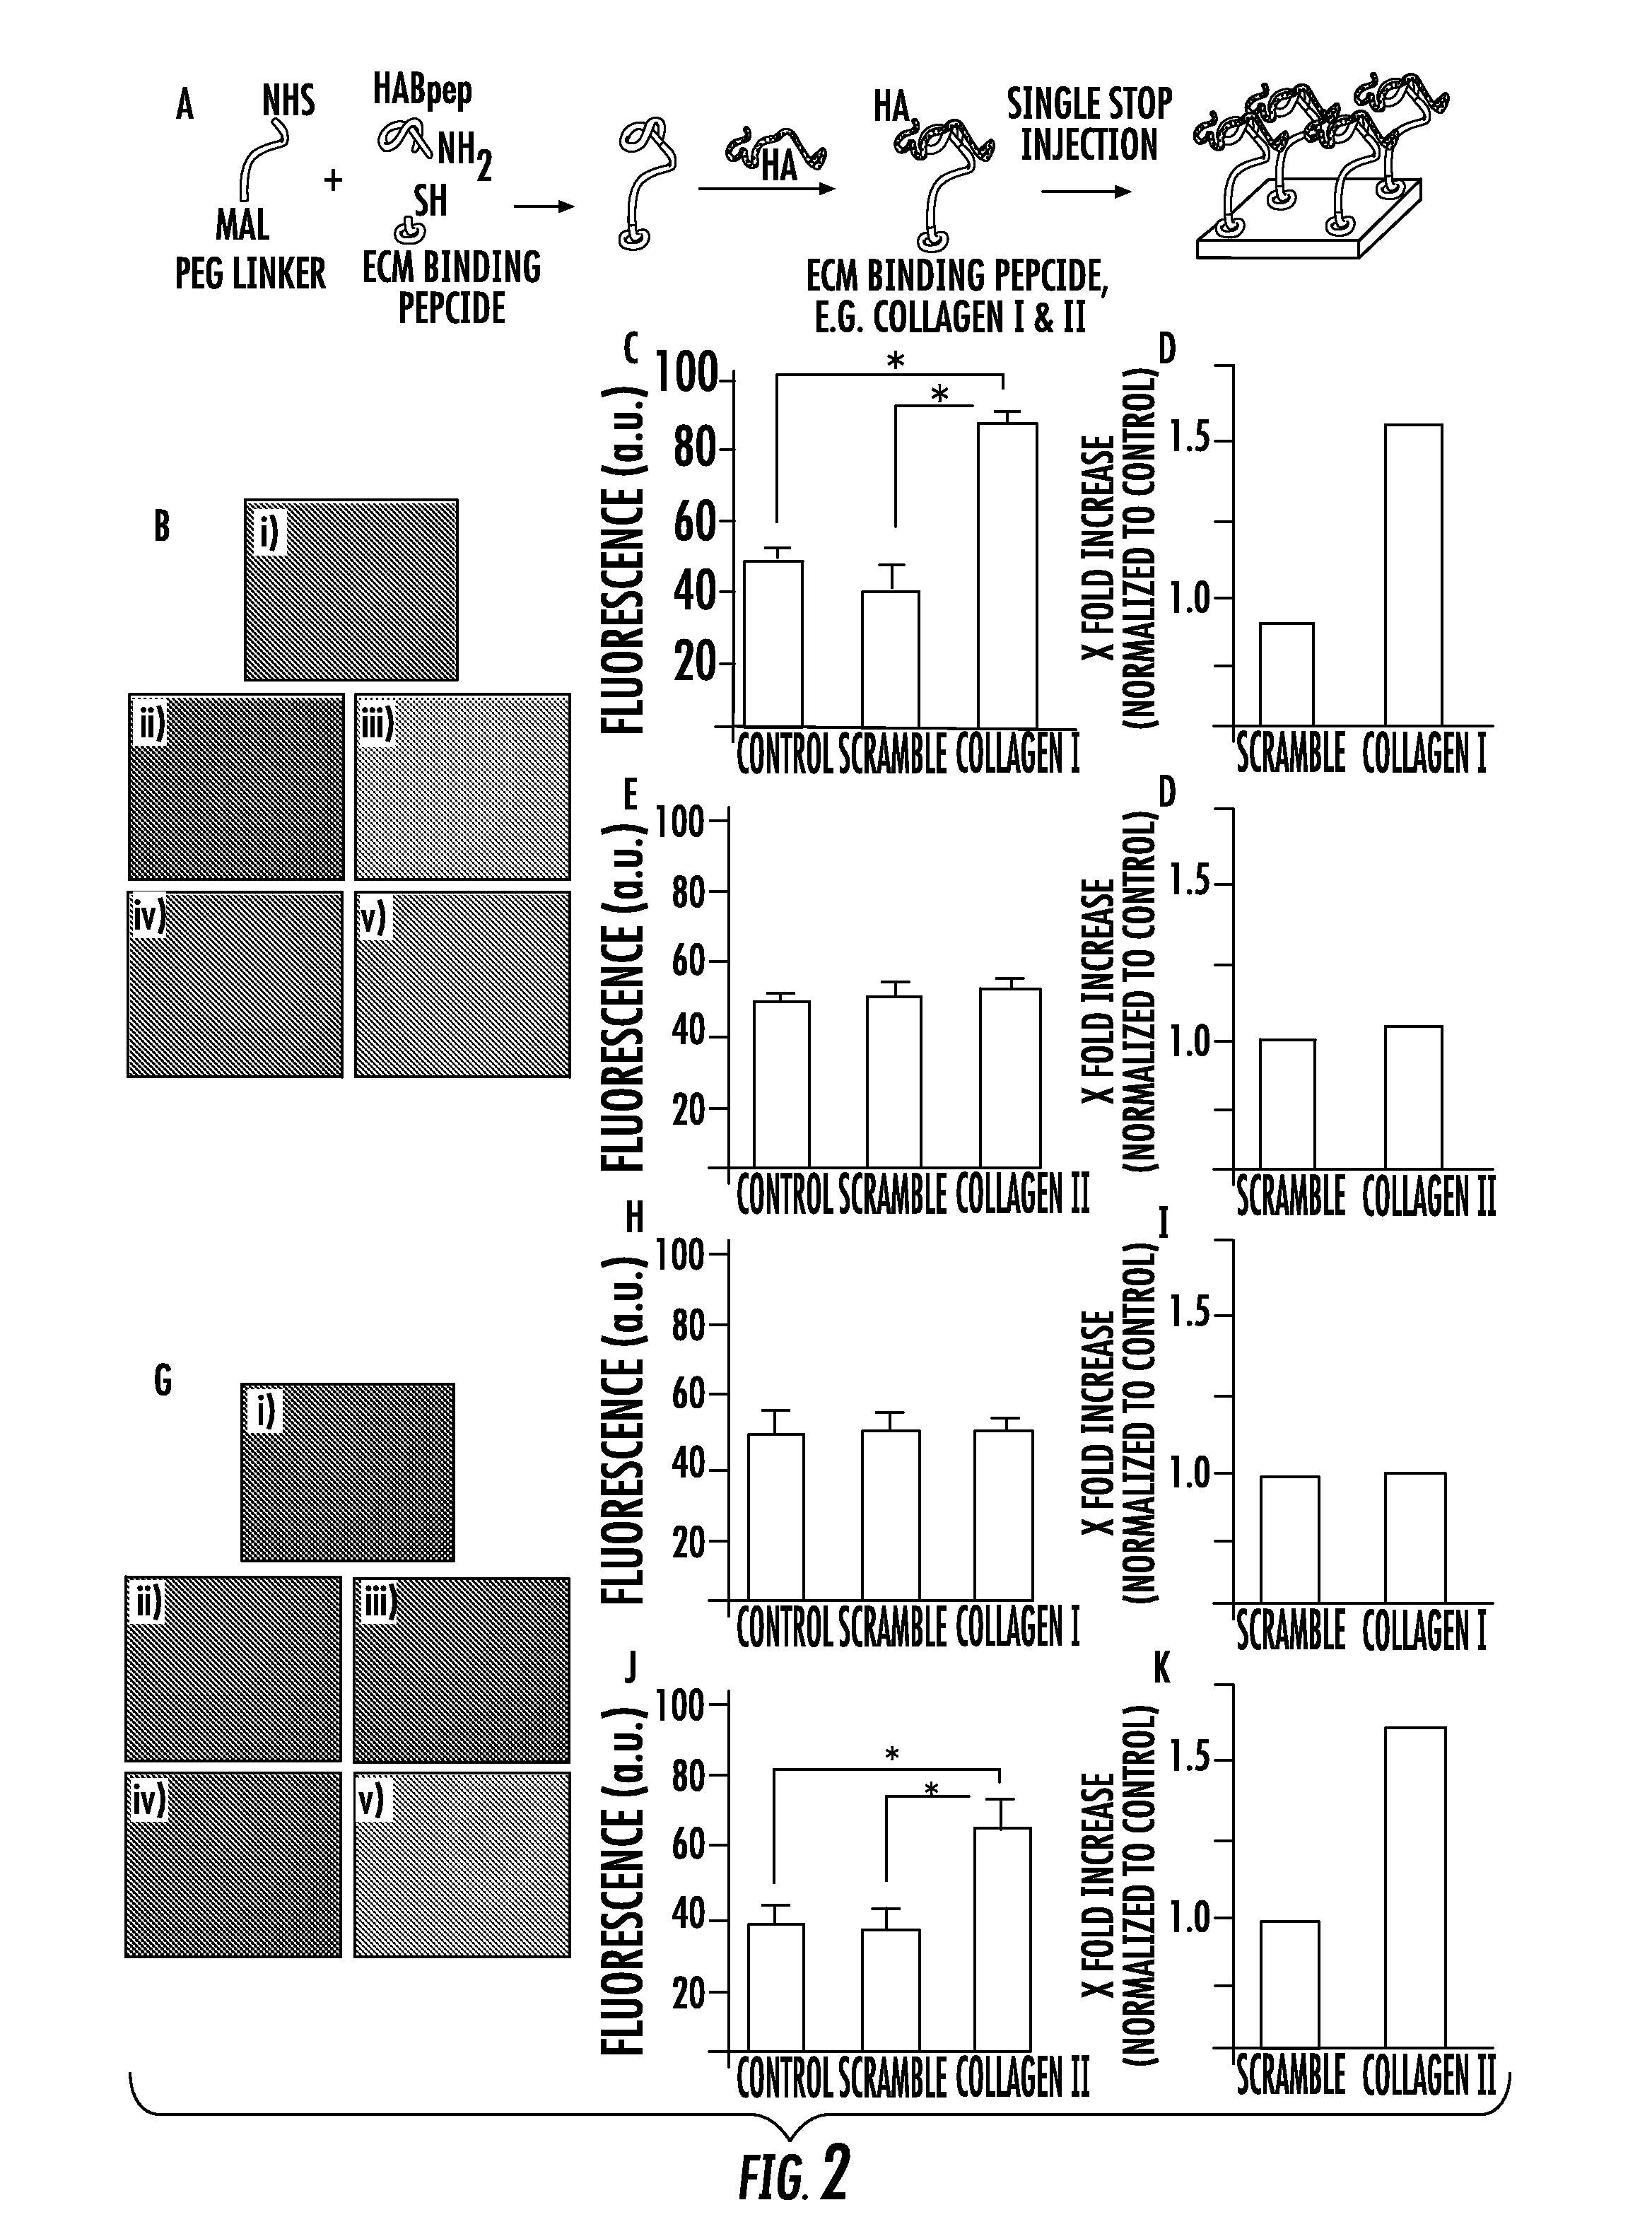 Biomaterials comprising hyaluronic acid binding peptides and extracellular matrix binding peptides for hyaluronic acid retention and tissue engineering applications